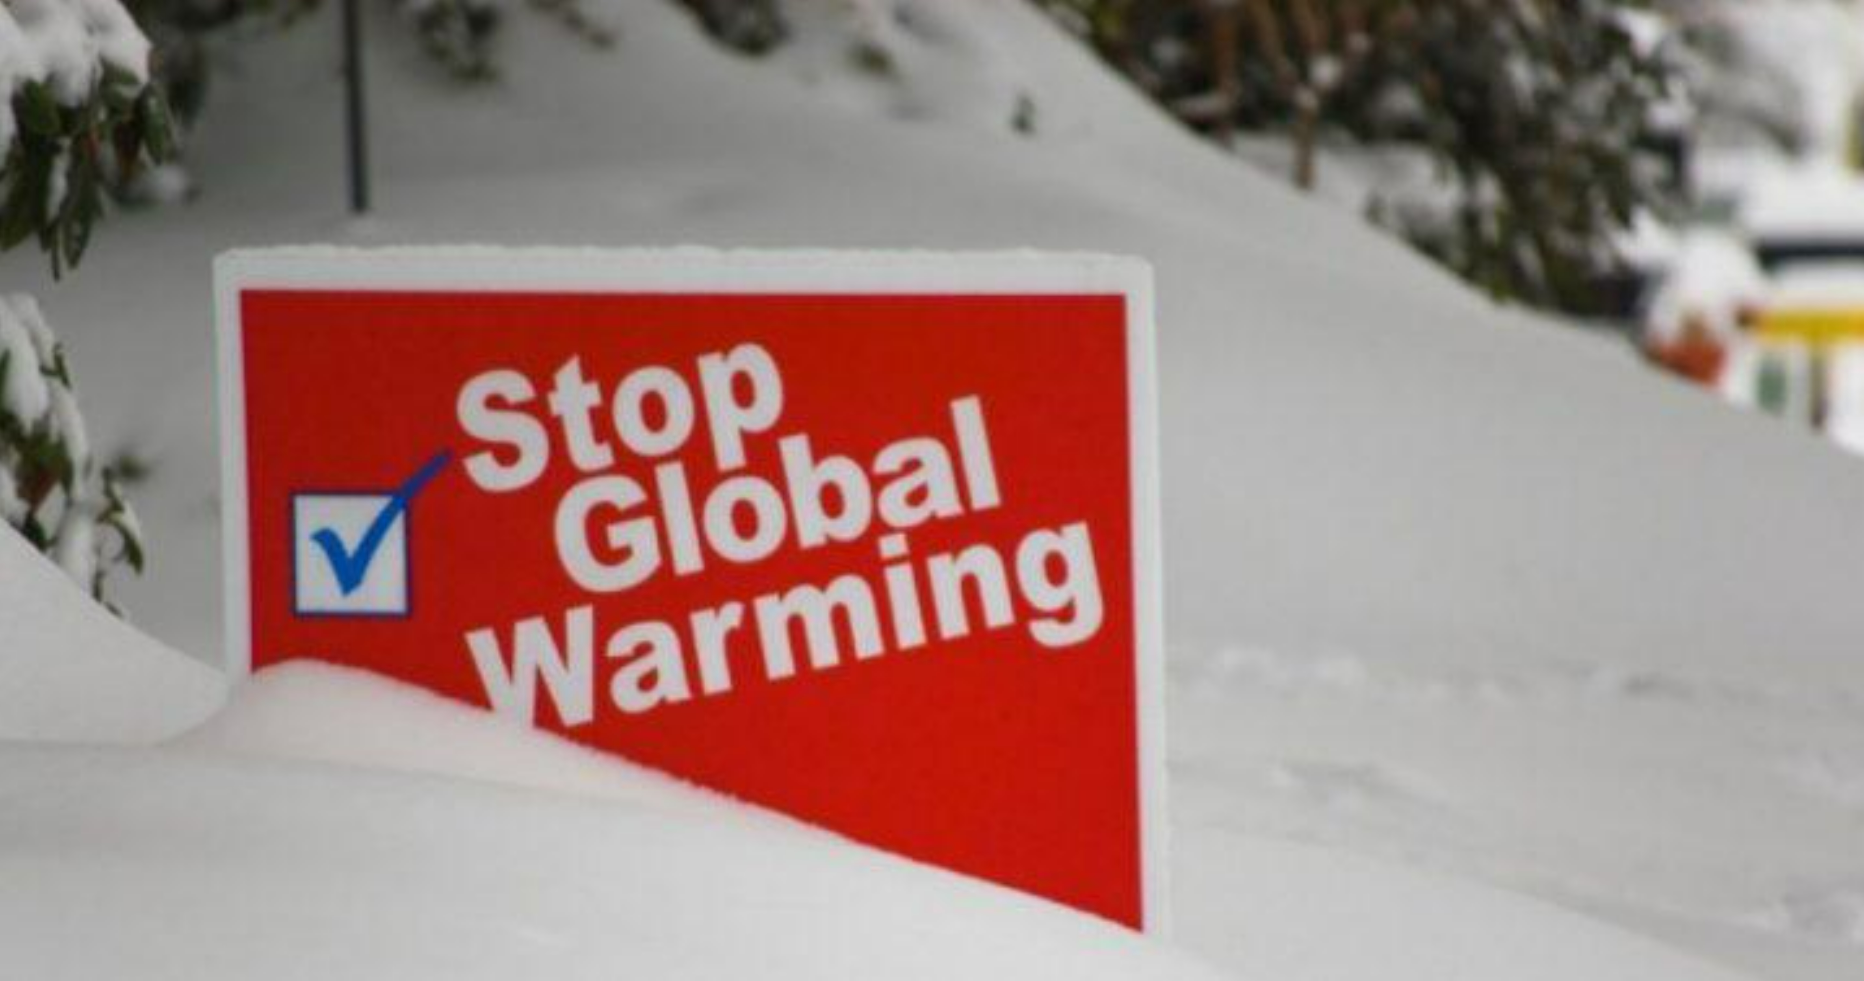 Top climate scientist: man-made “global warming crisis” is a fabrication. An insider exposes the mechanics of manipulating science and shaping the narrative